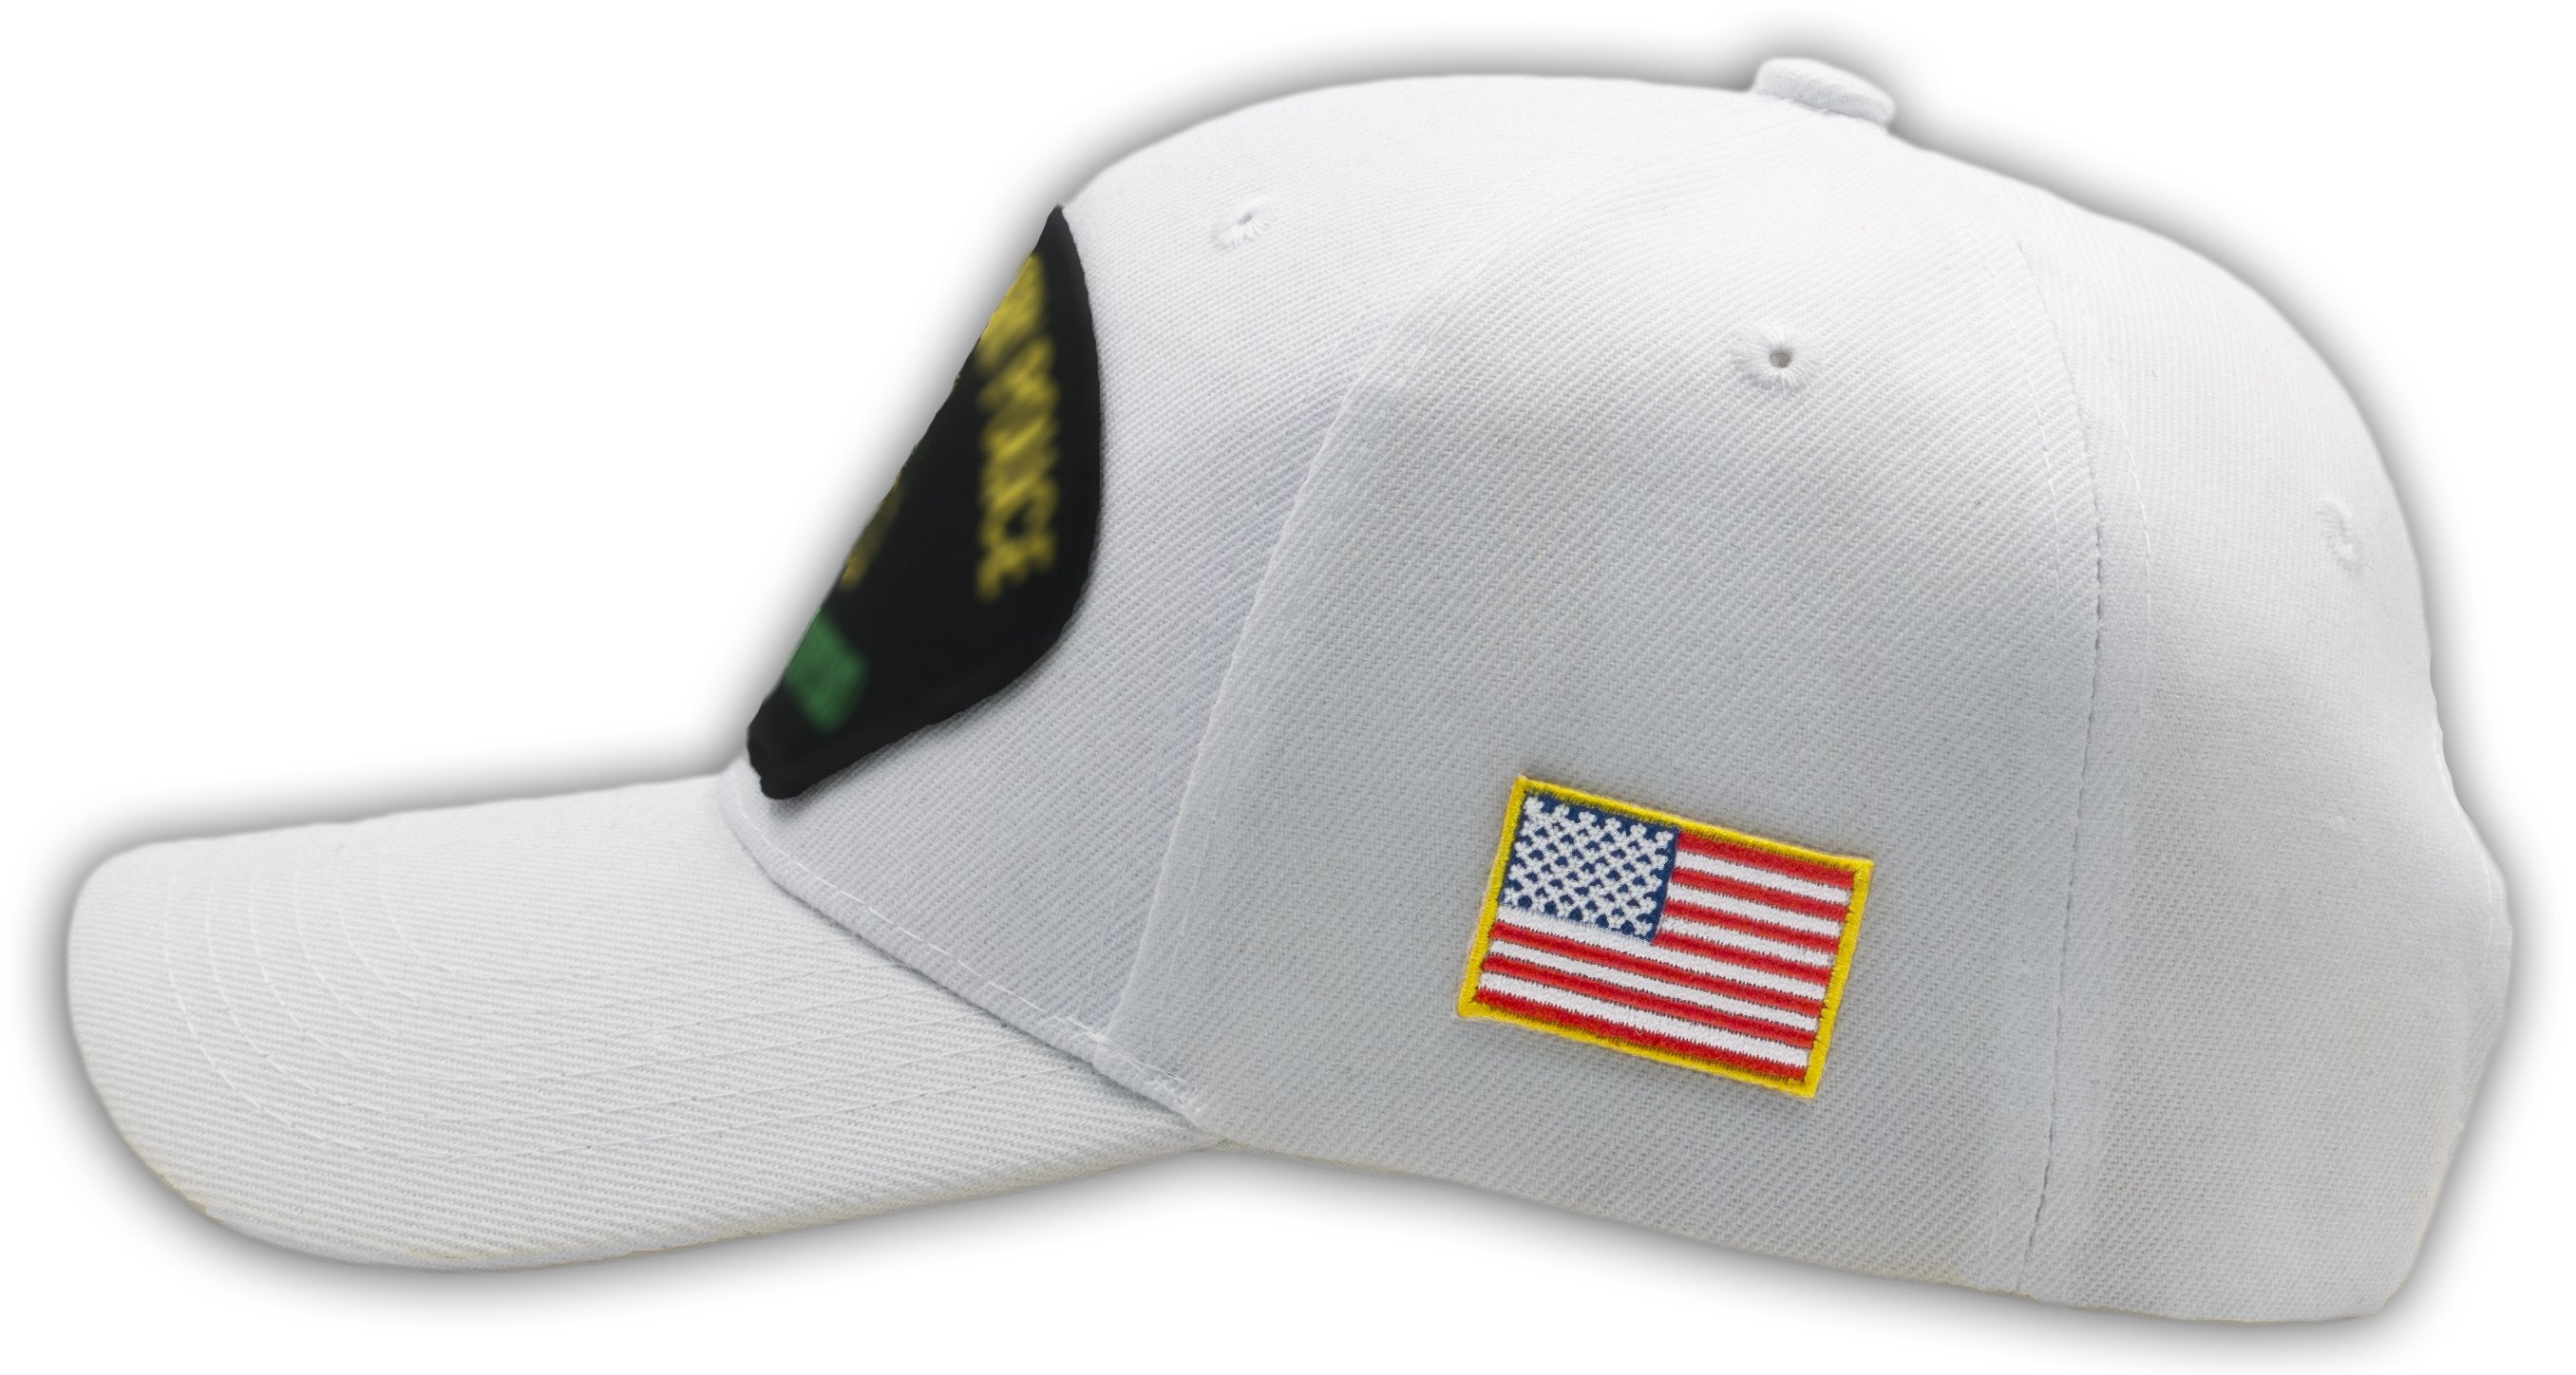 US Army Senior Aviator Hat - Multiple Colors Available